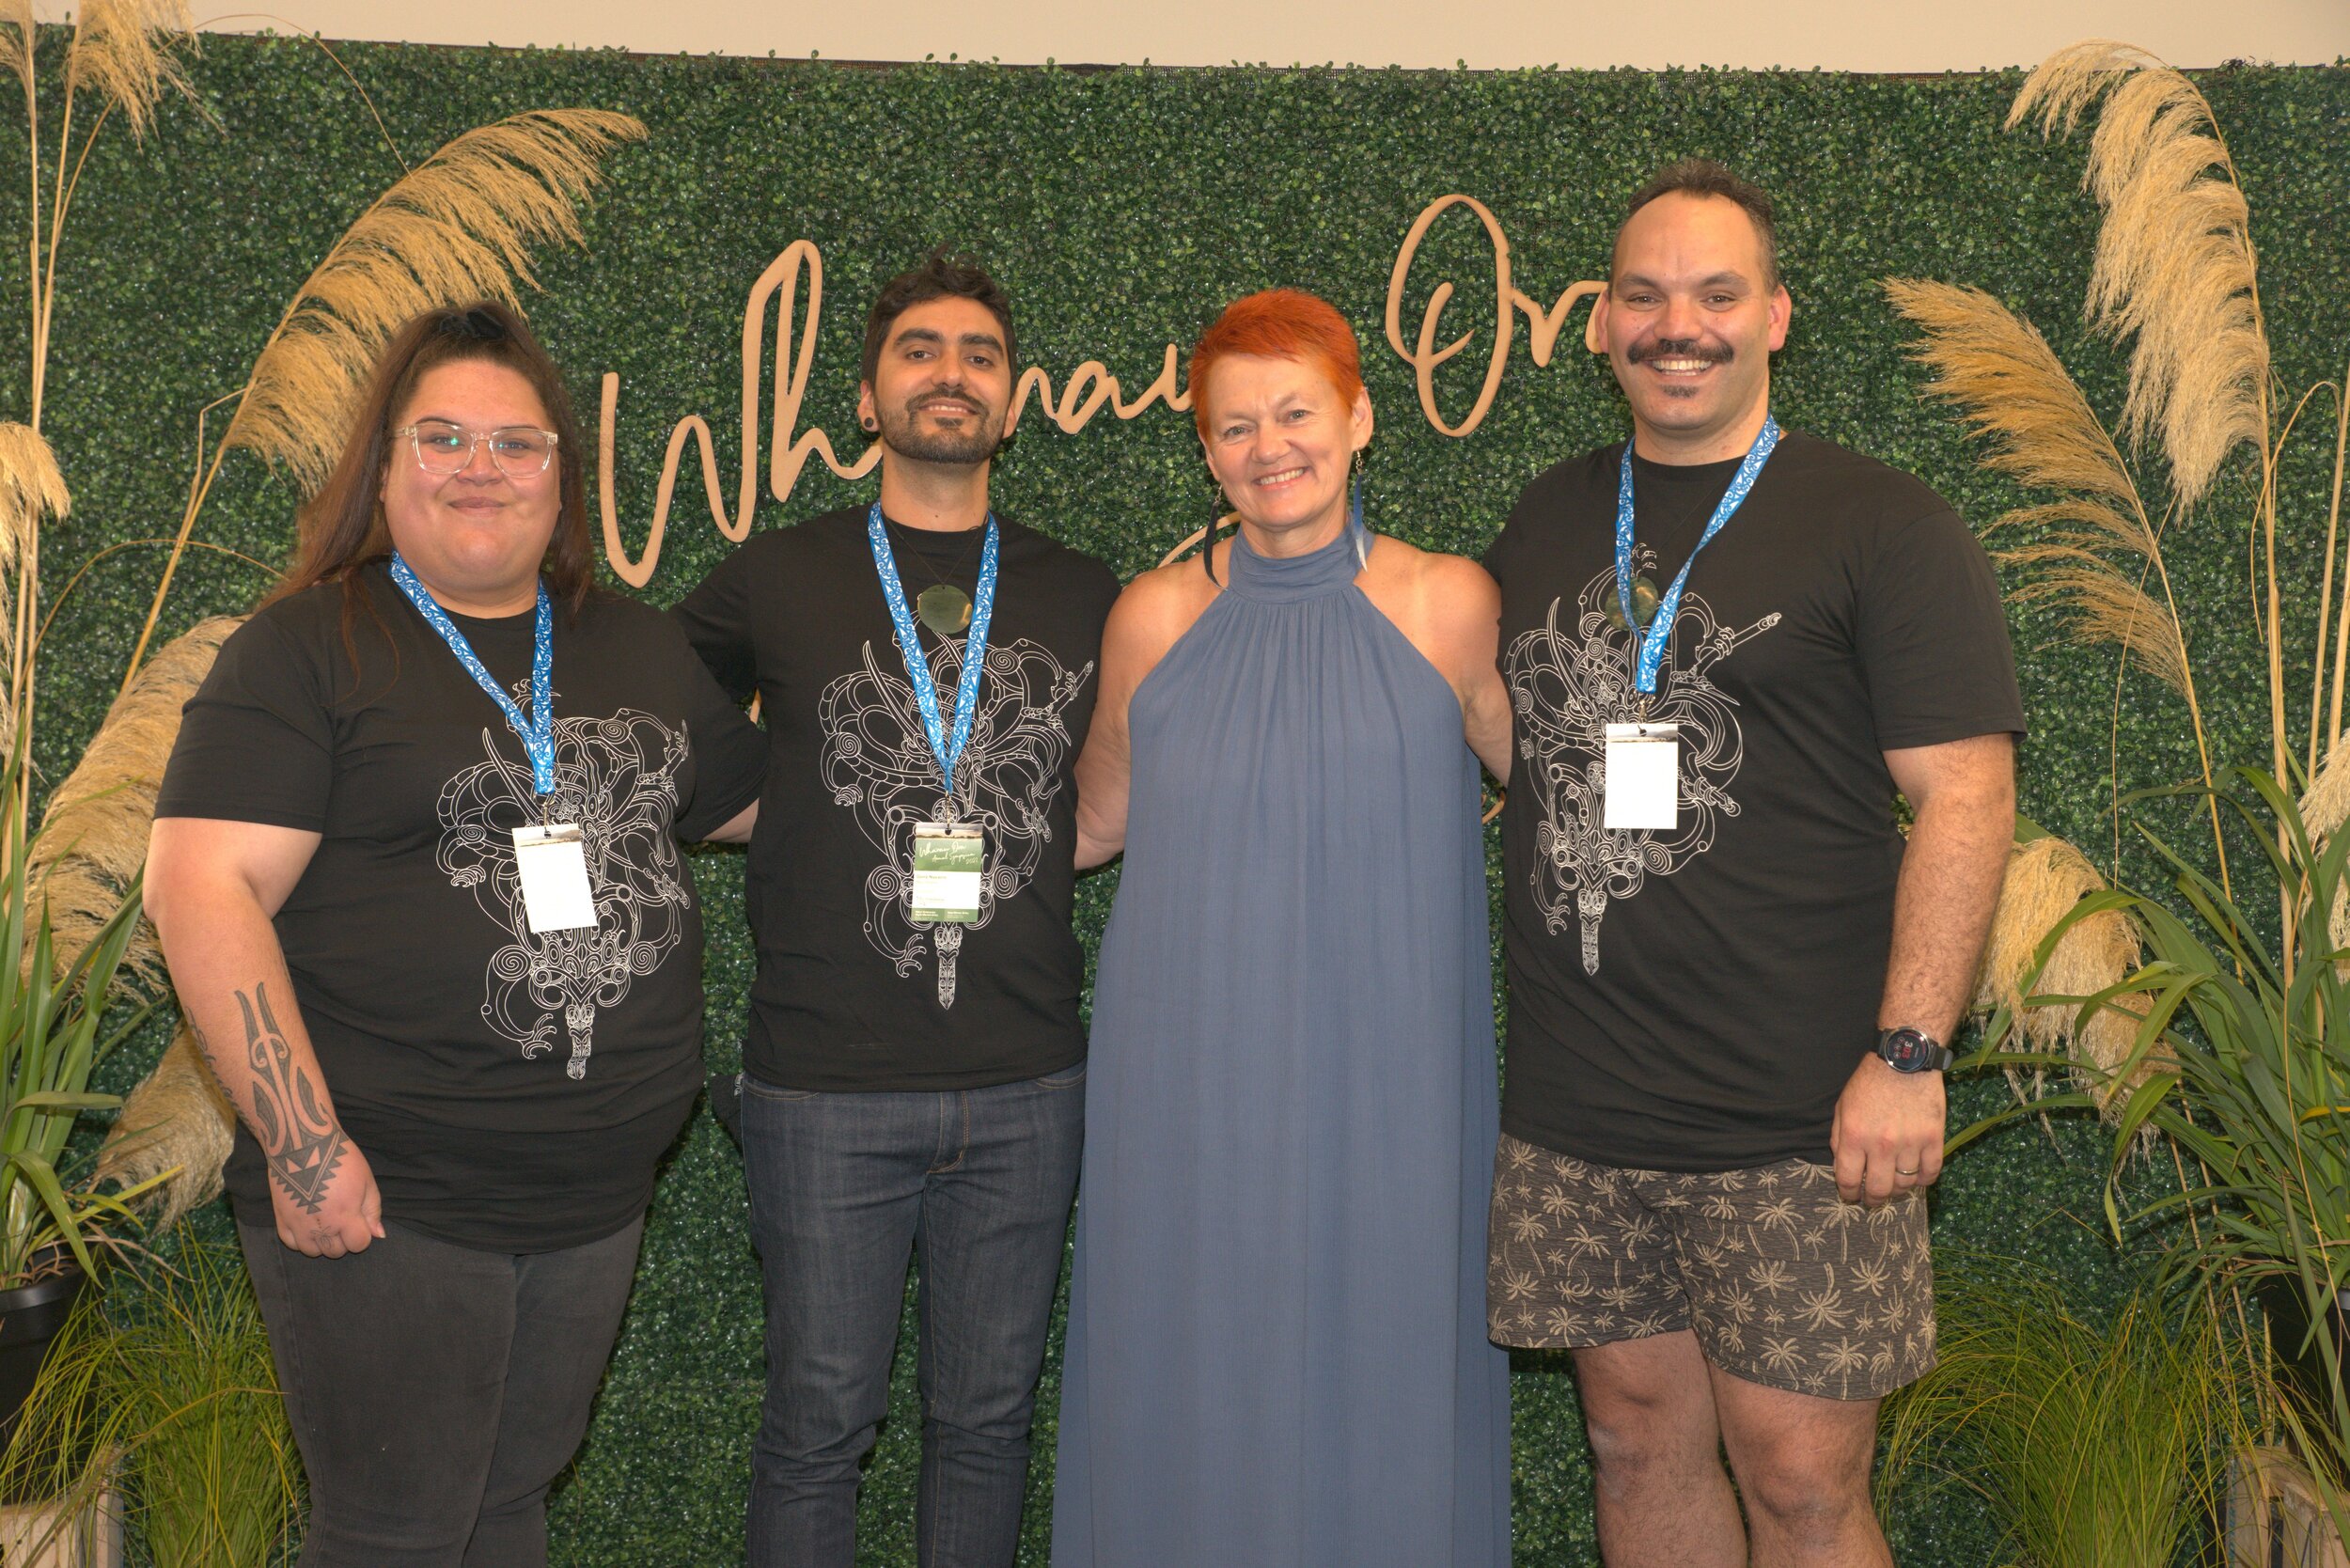 The magnificent team from Maui Studios – Hera, Gonzalo, and Caleb who pulled a couple of all nighters to come up with our highlights videos